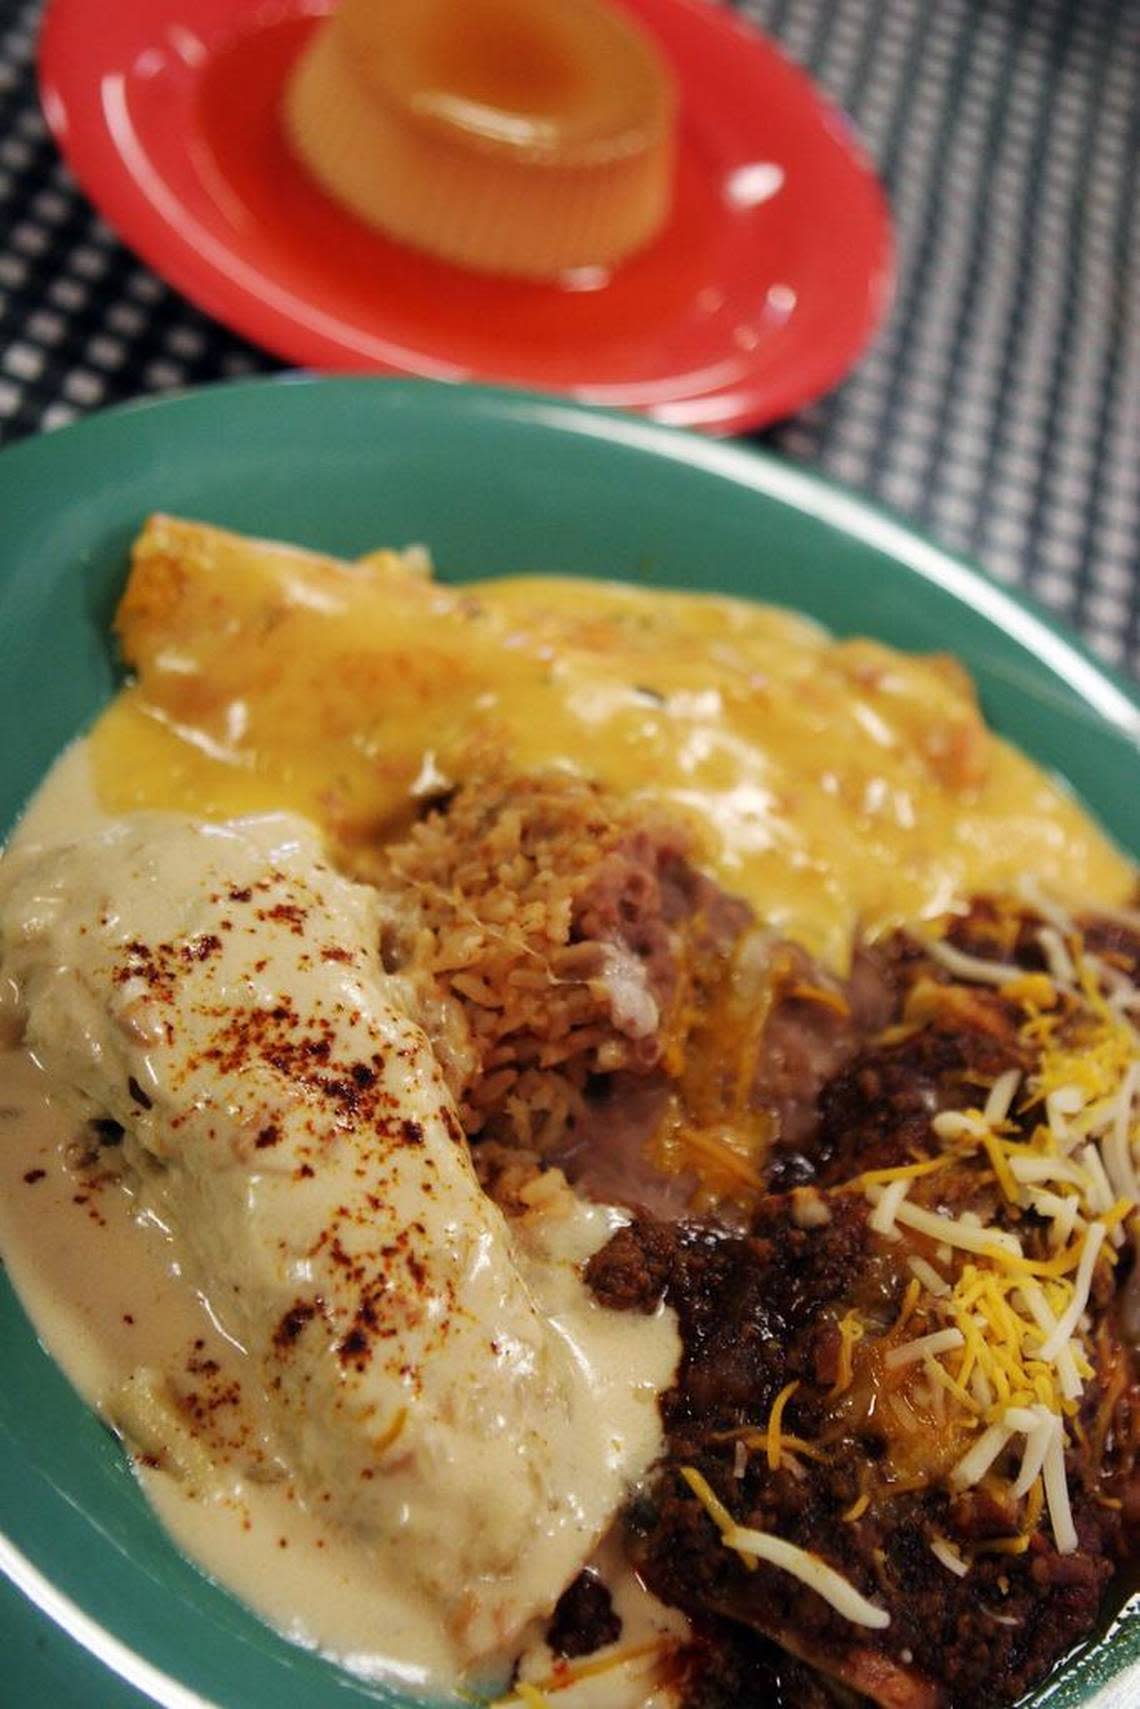 A combo enchilada with flan at La Espuela Mexican Cantina at the Fort Worth Stock Show.